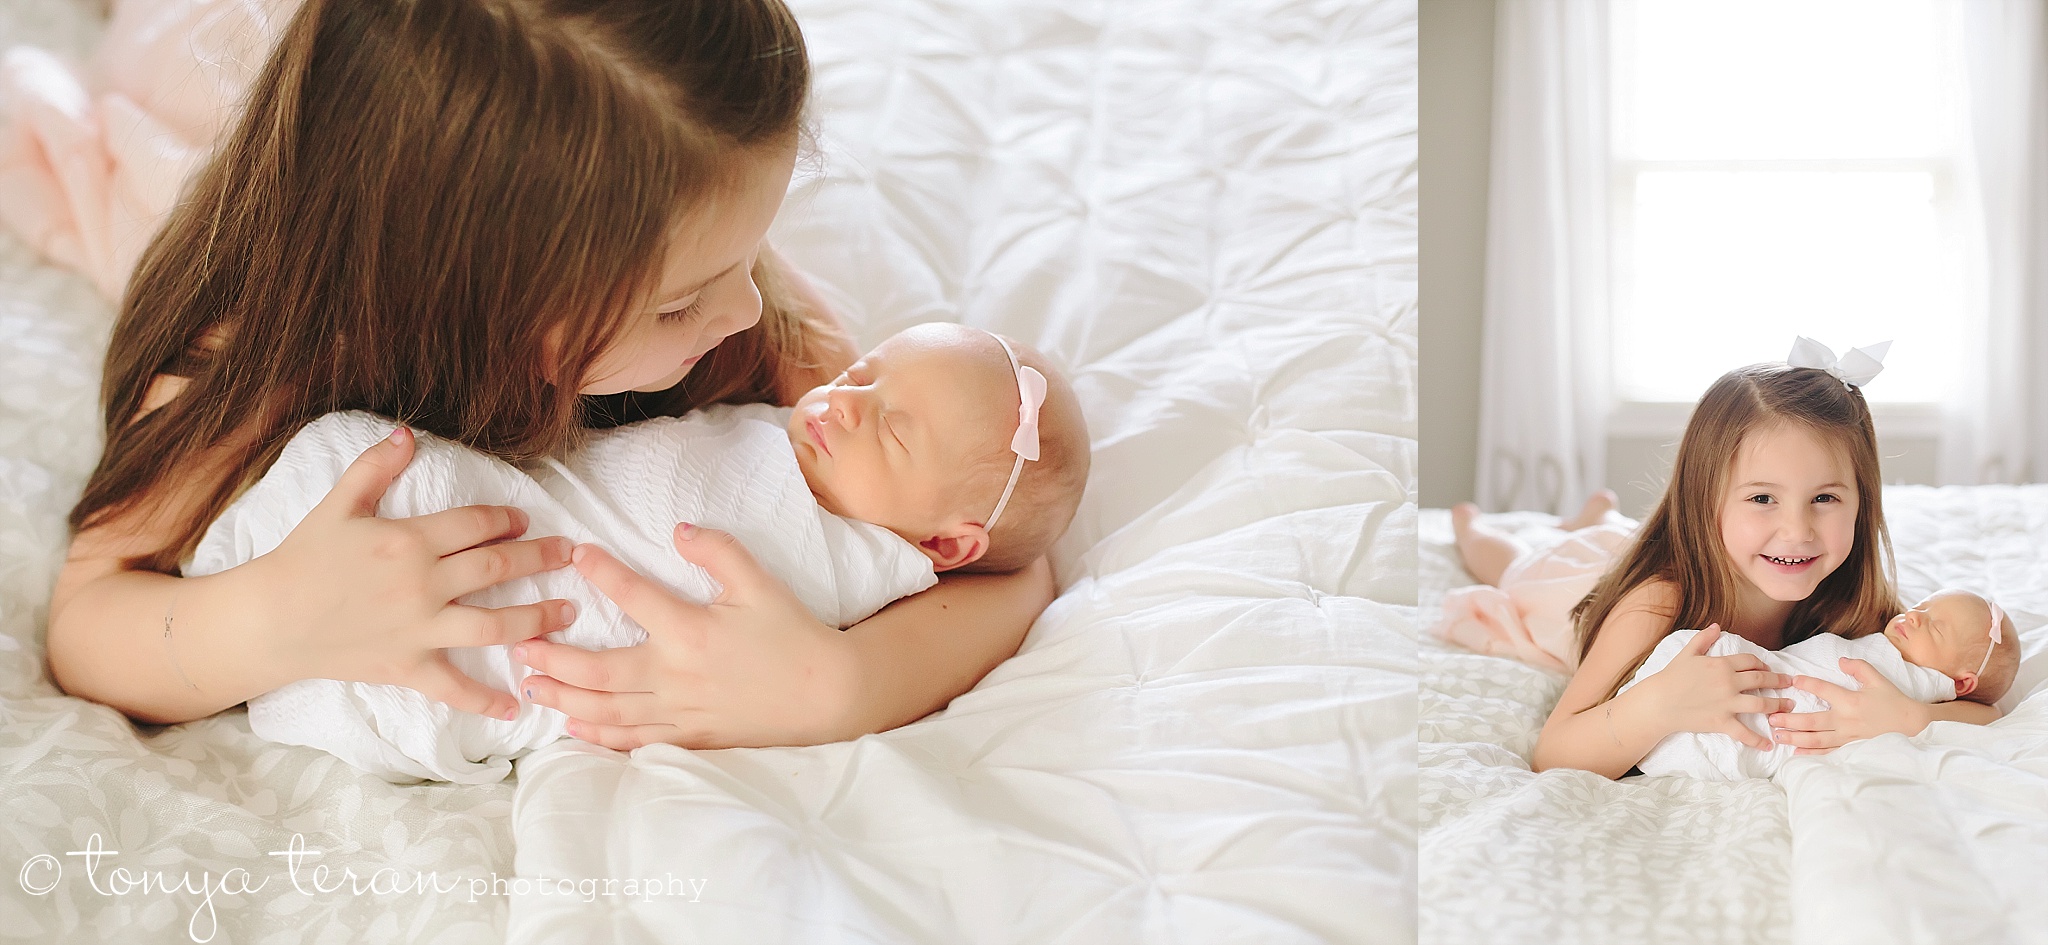 Newborn and Sibling Photo Session | Tonya Teran Photography, Bethesda, MD Newborn, Baby, and Family Photographer